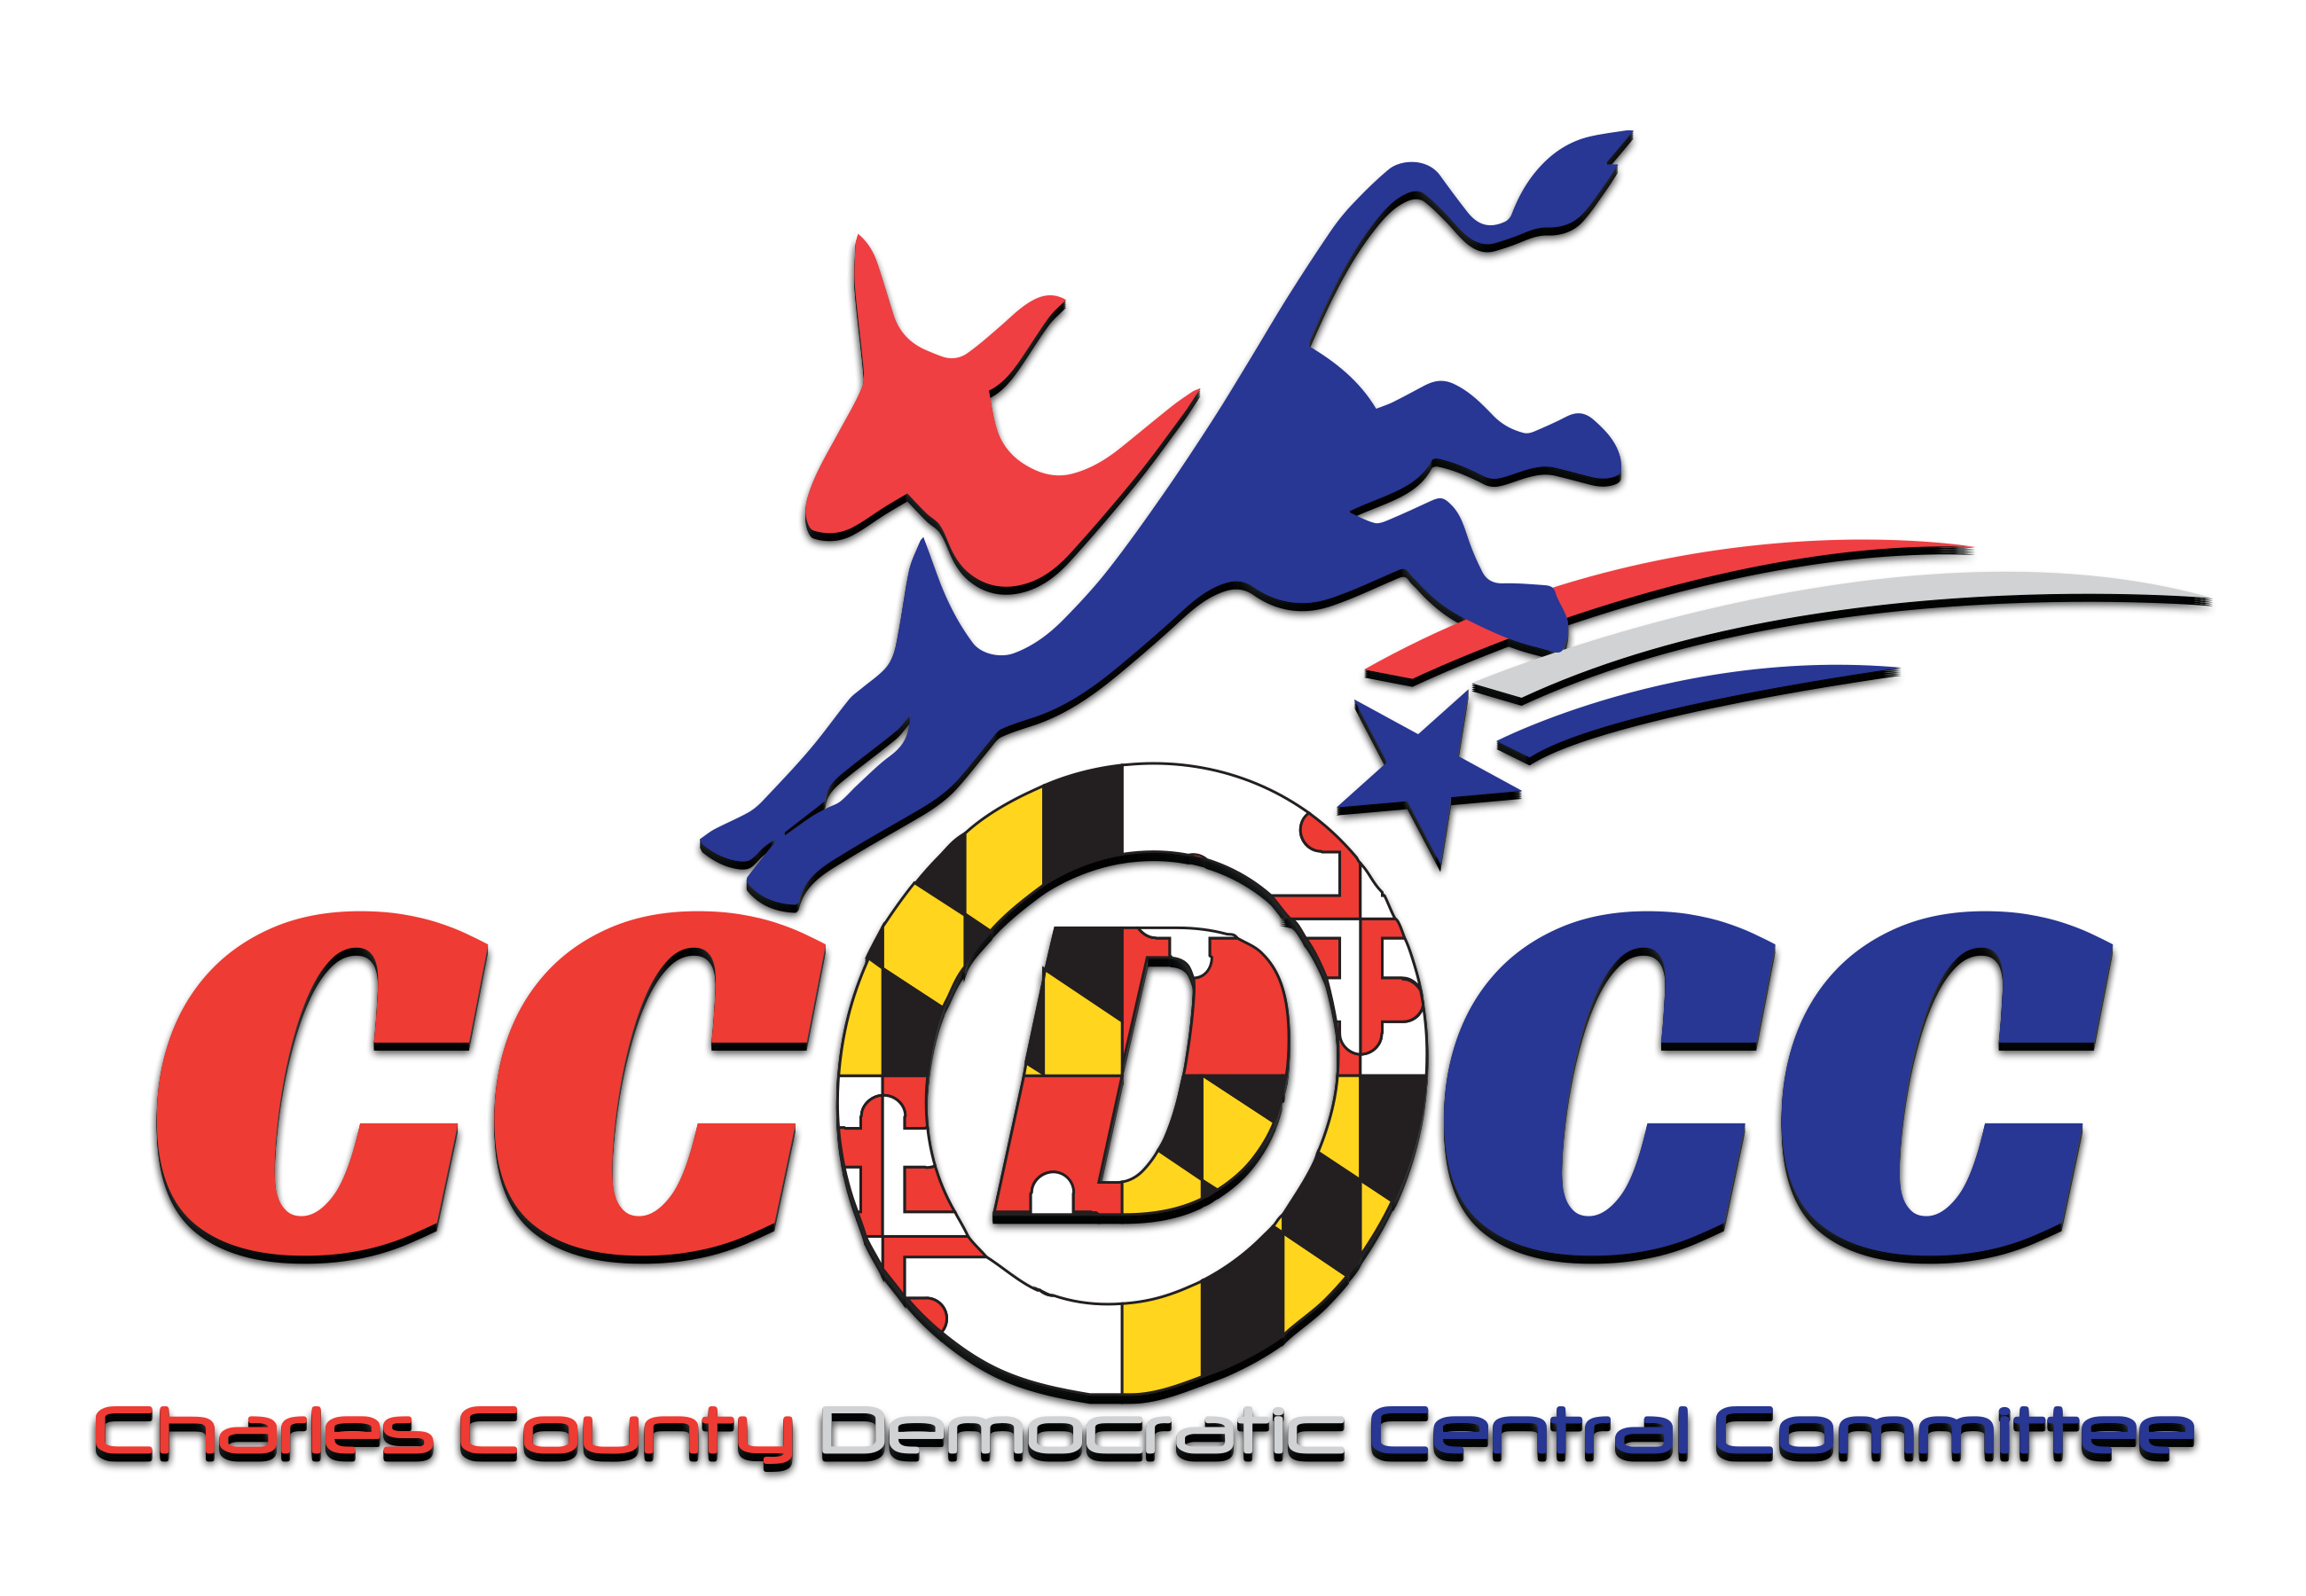 Charles County Democratic Central Committee